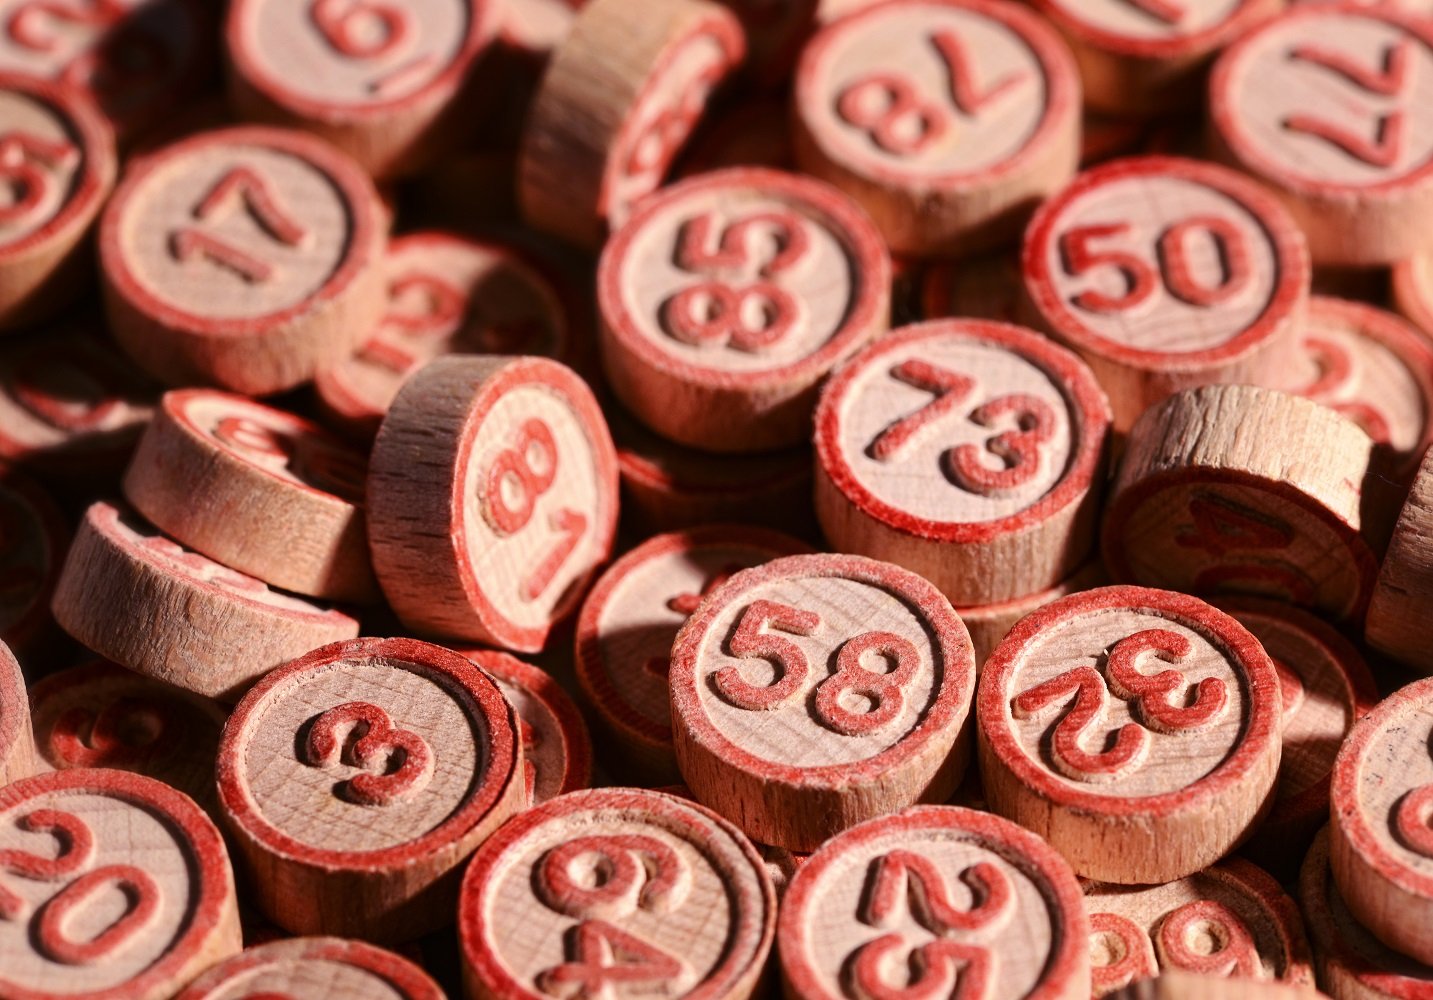 Background of lucky bingo numbers on round wooden tokens to be drawn at random during the game and marked off on the bingo cards for a win